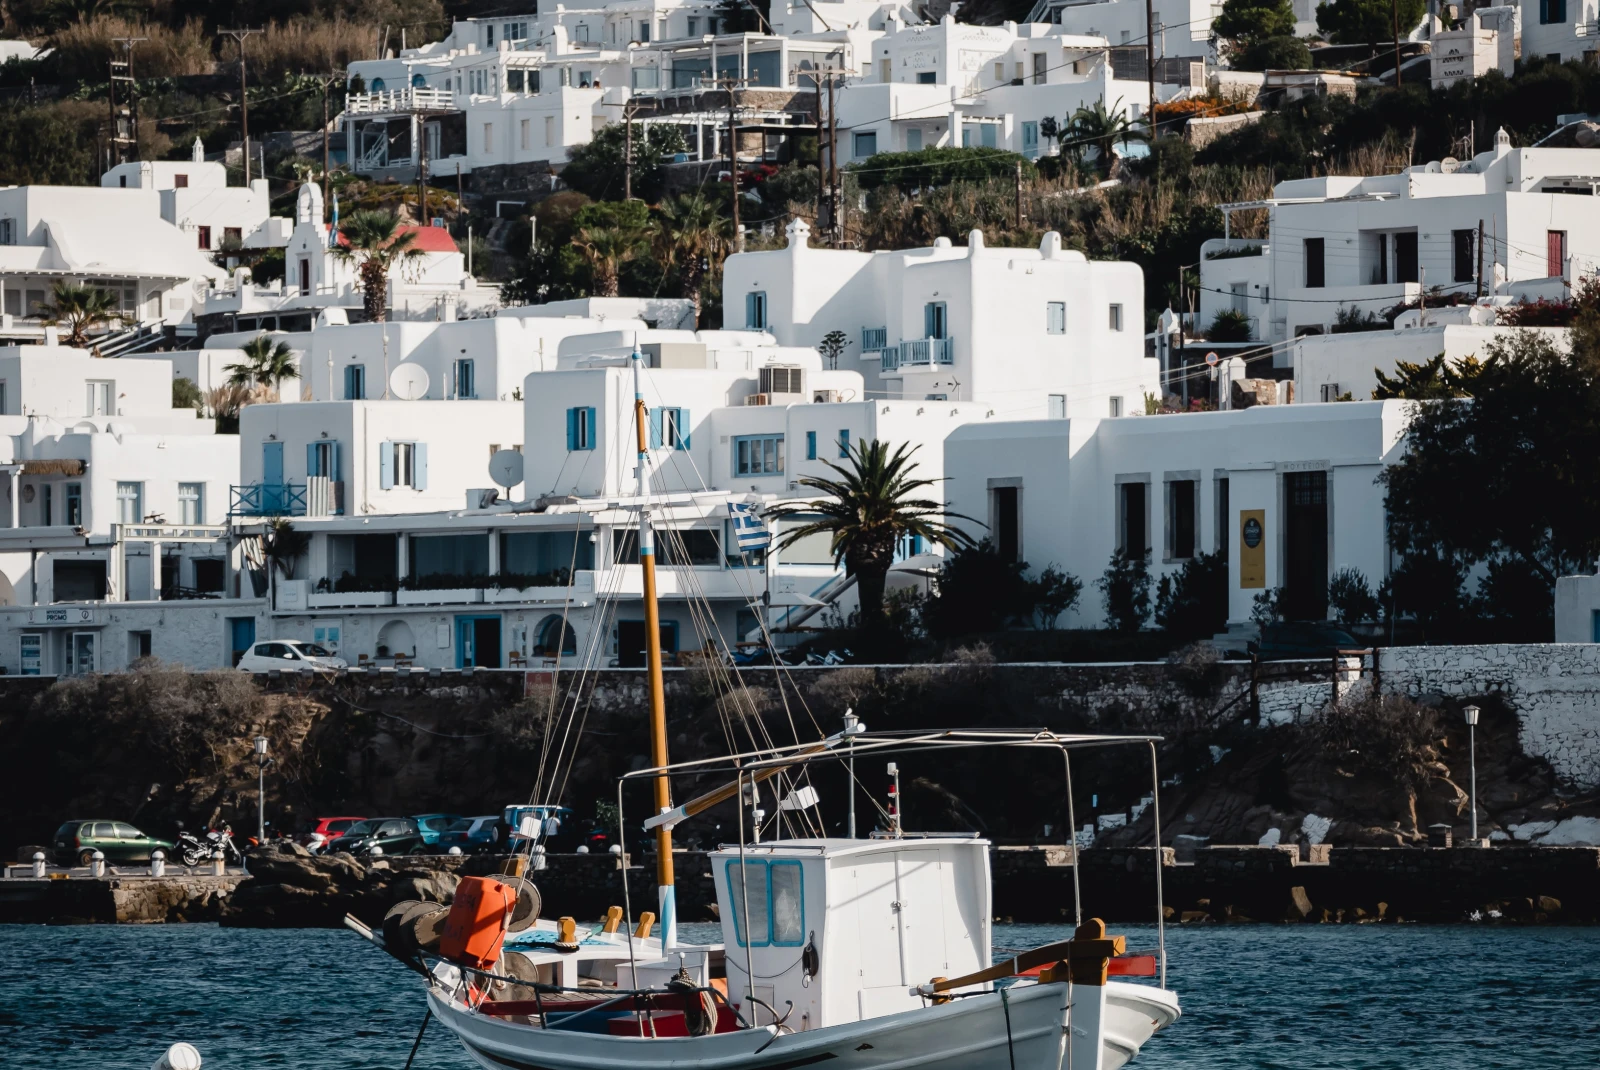 White boat in body of water with white houses in the background during daytime